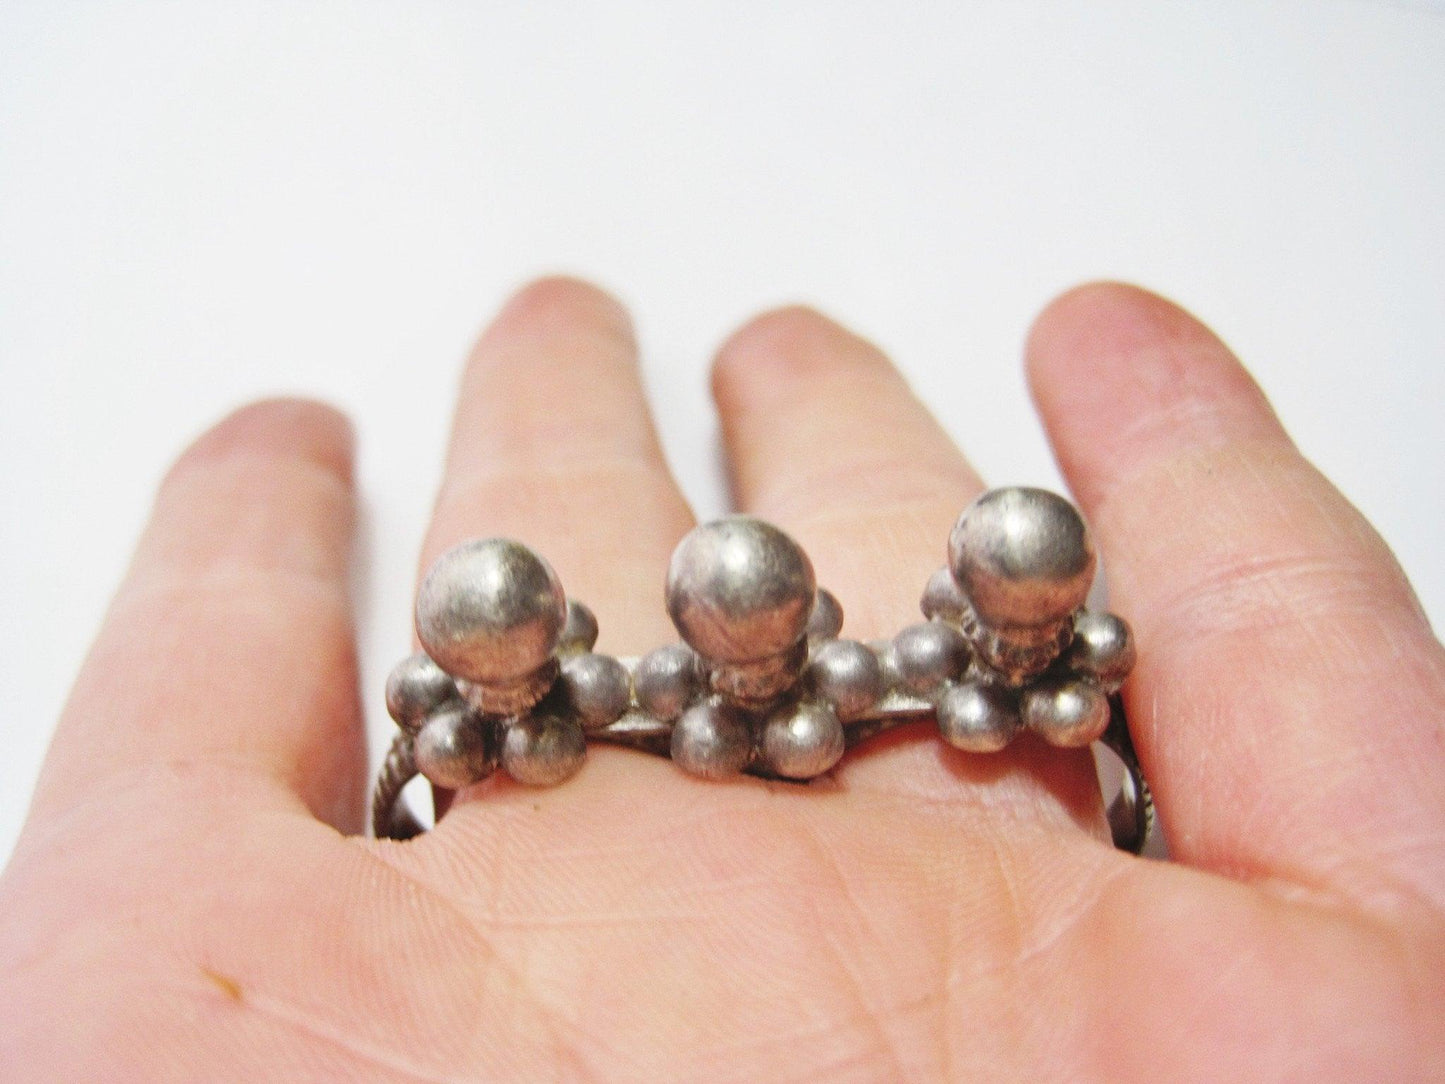 Vintage Silver Indian Double Finger Ring from Rajasthan - Anteeka